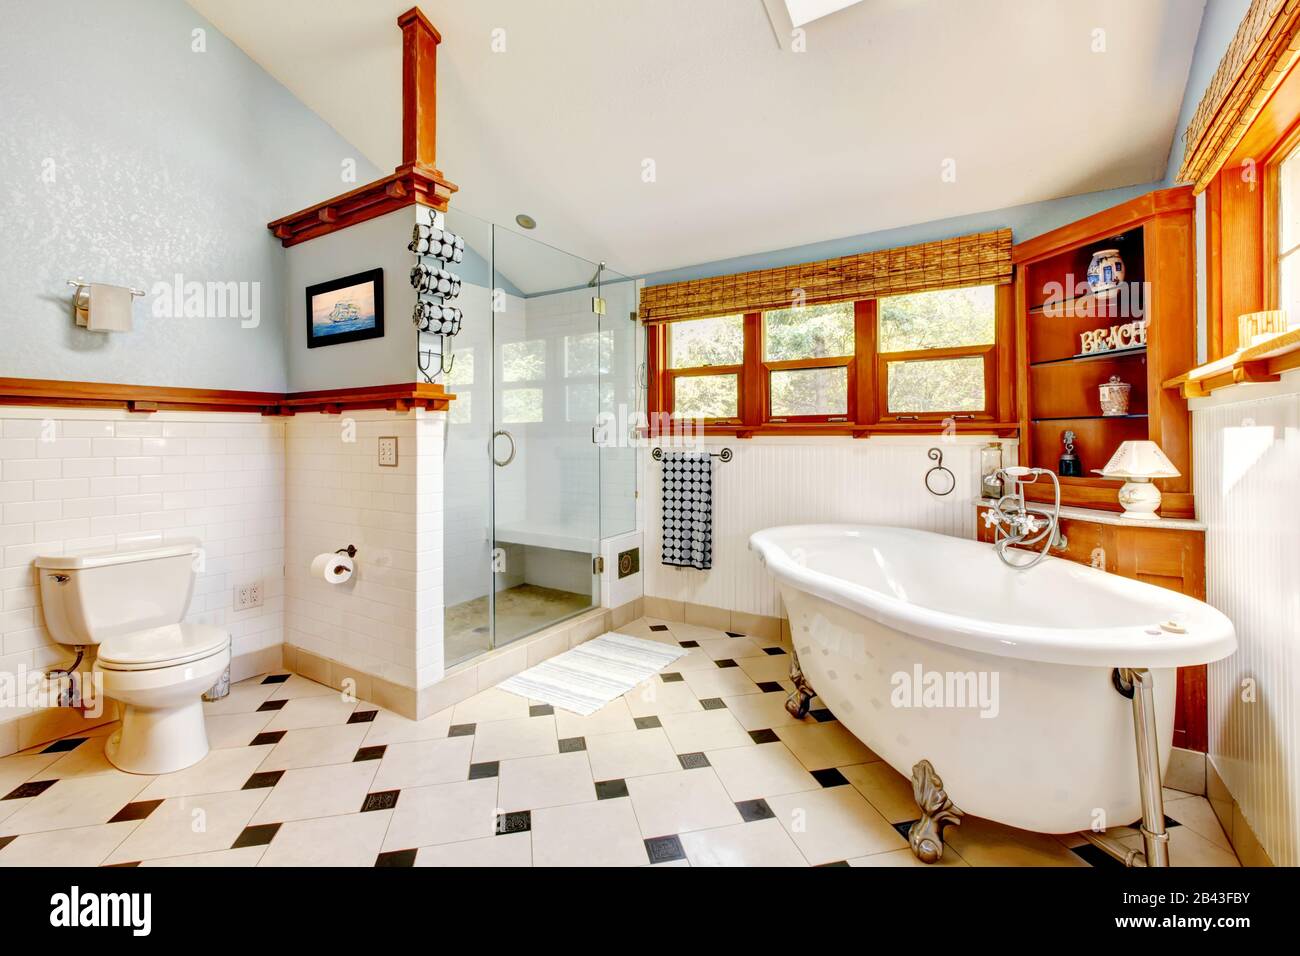 Large classic blue bathroom interior with tub and tiles and wood cabinets. Stock Photo